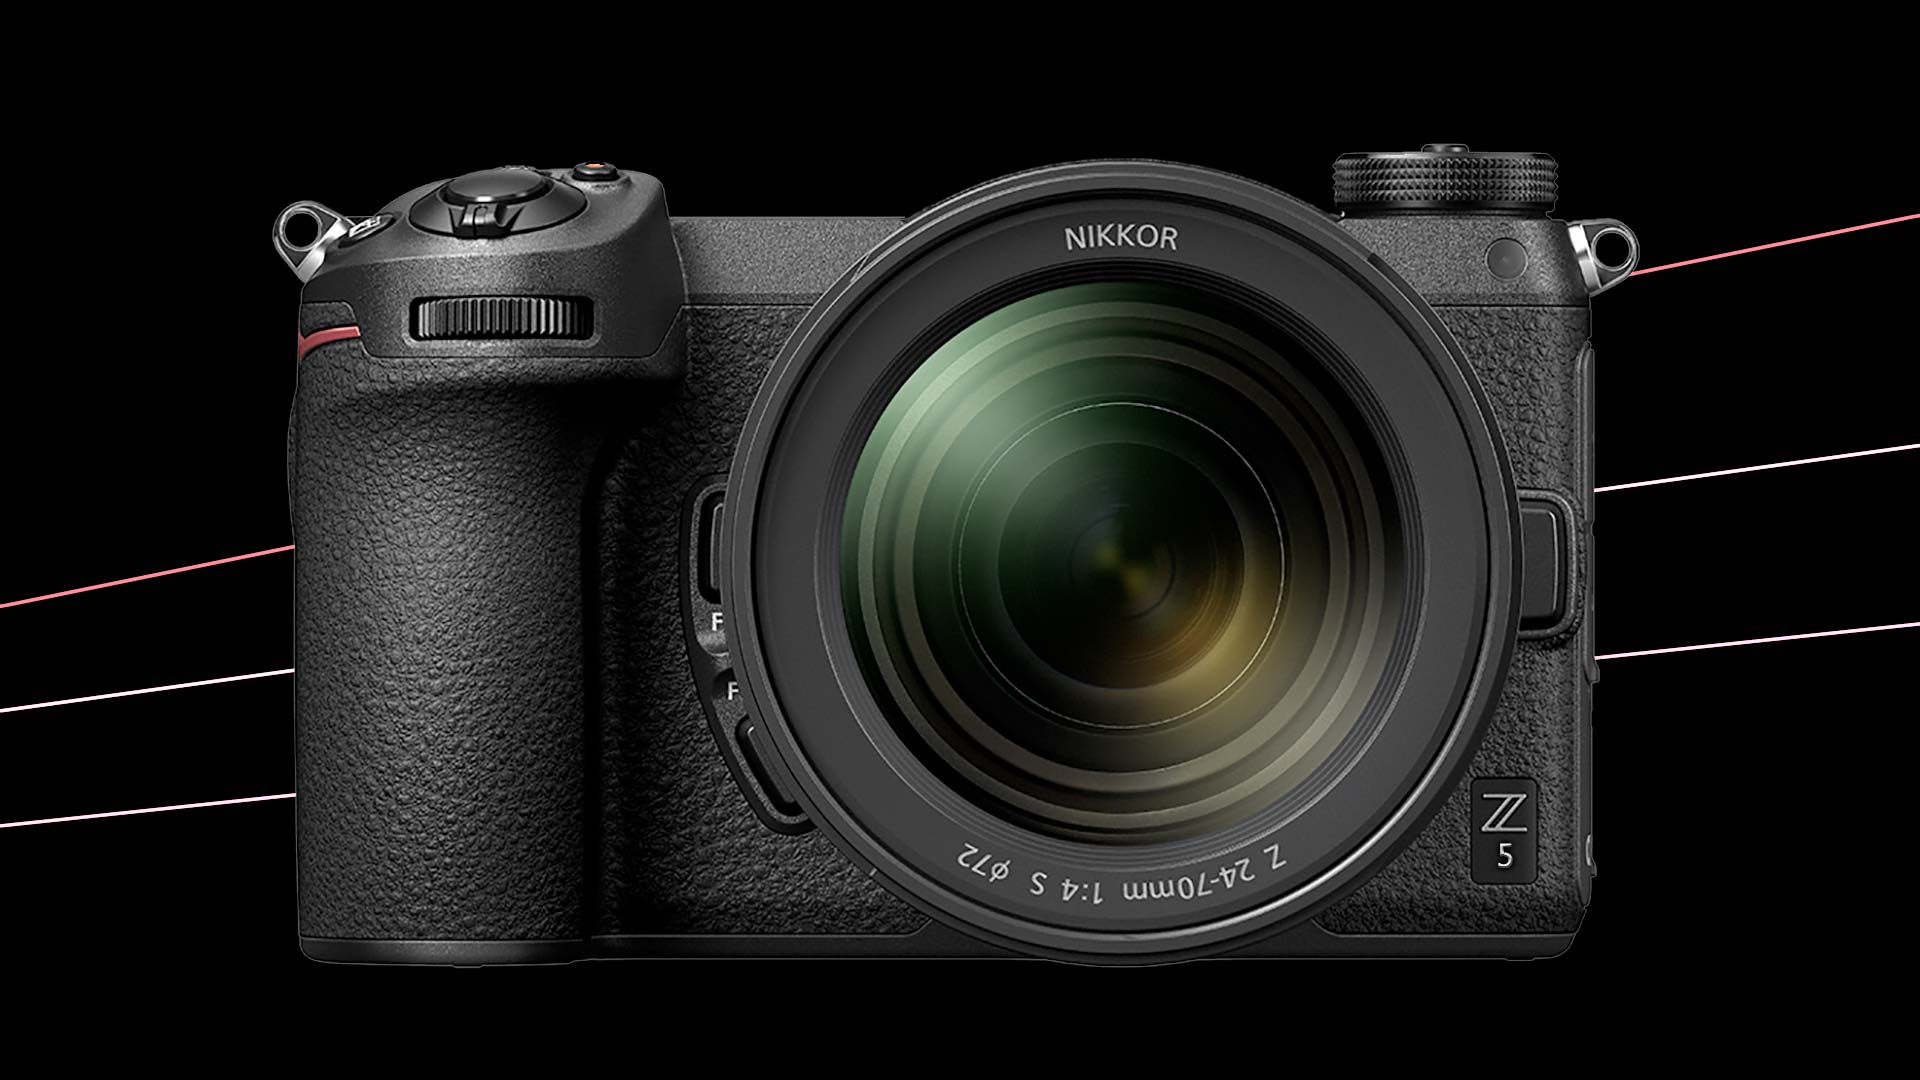 Nikon Z5: everything we know so far about the full-frame mirrorless camera